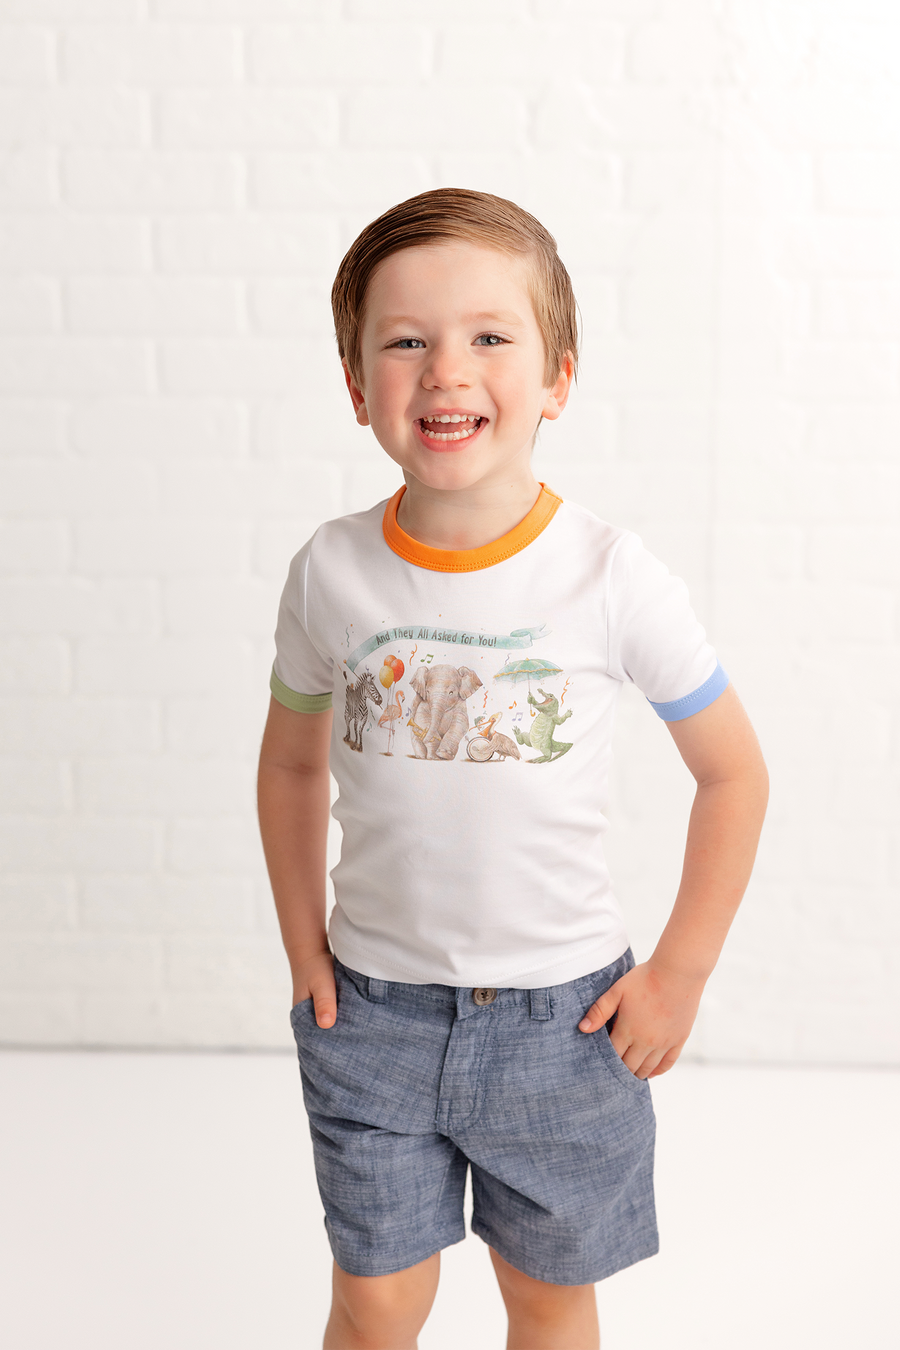 and-they-all-asked-for-you-organic-childrens-clothing